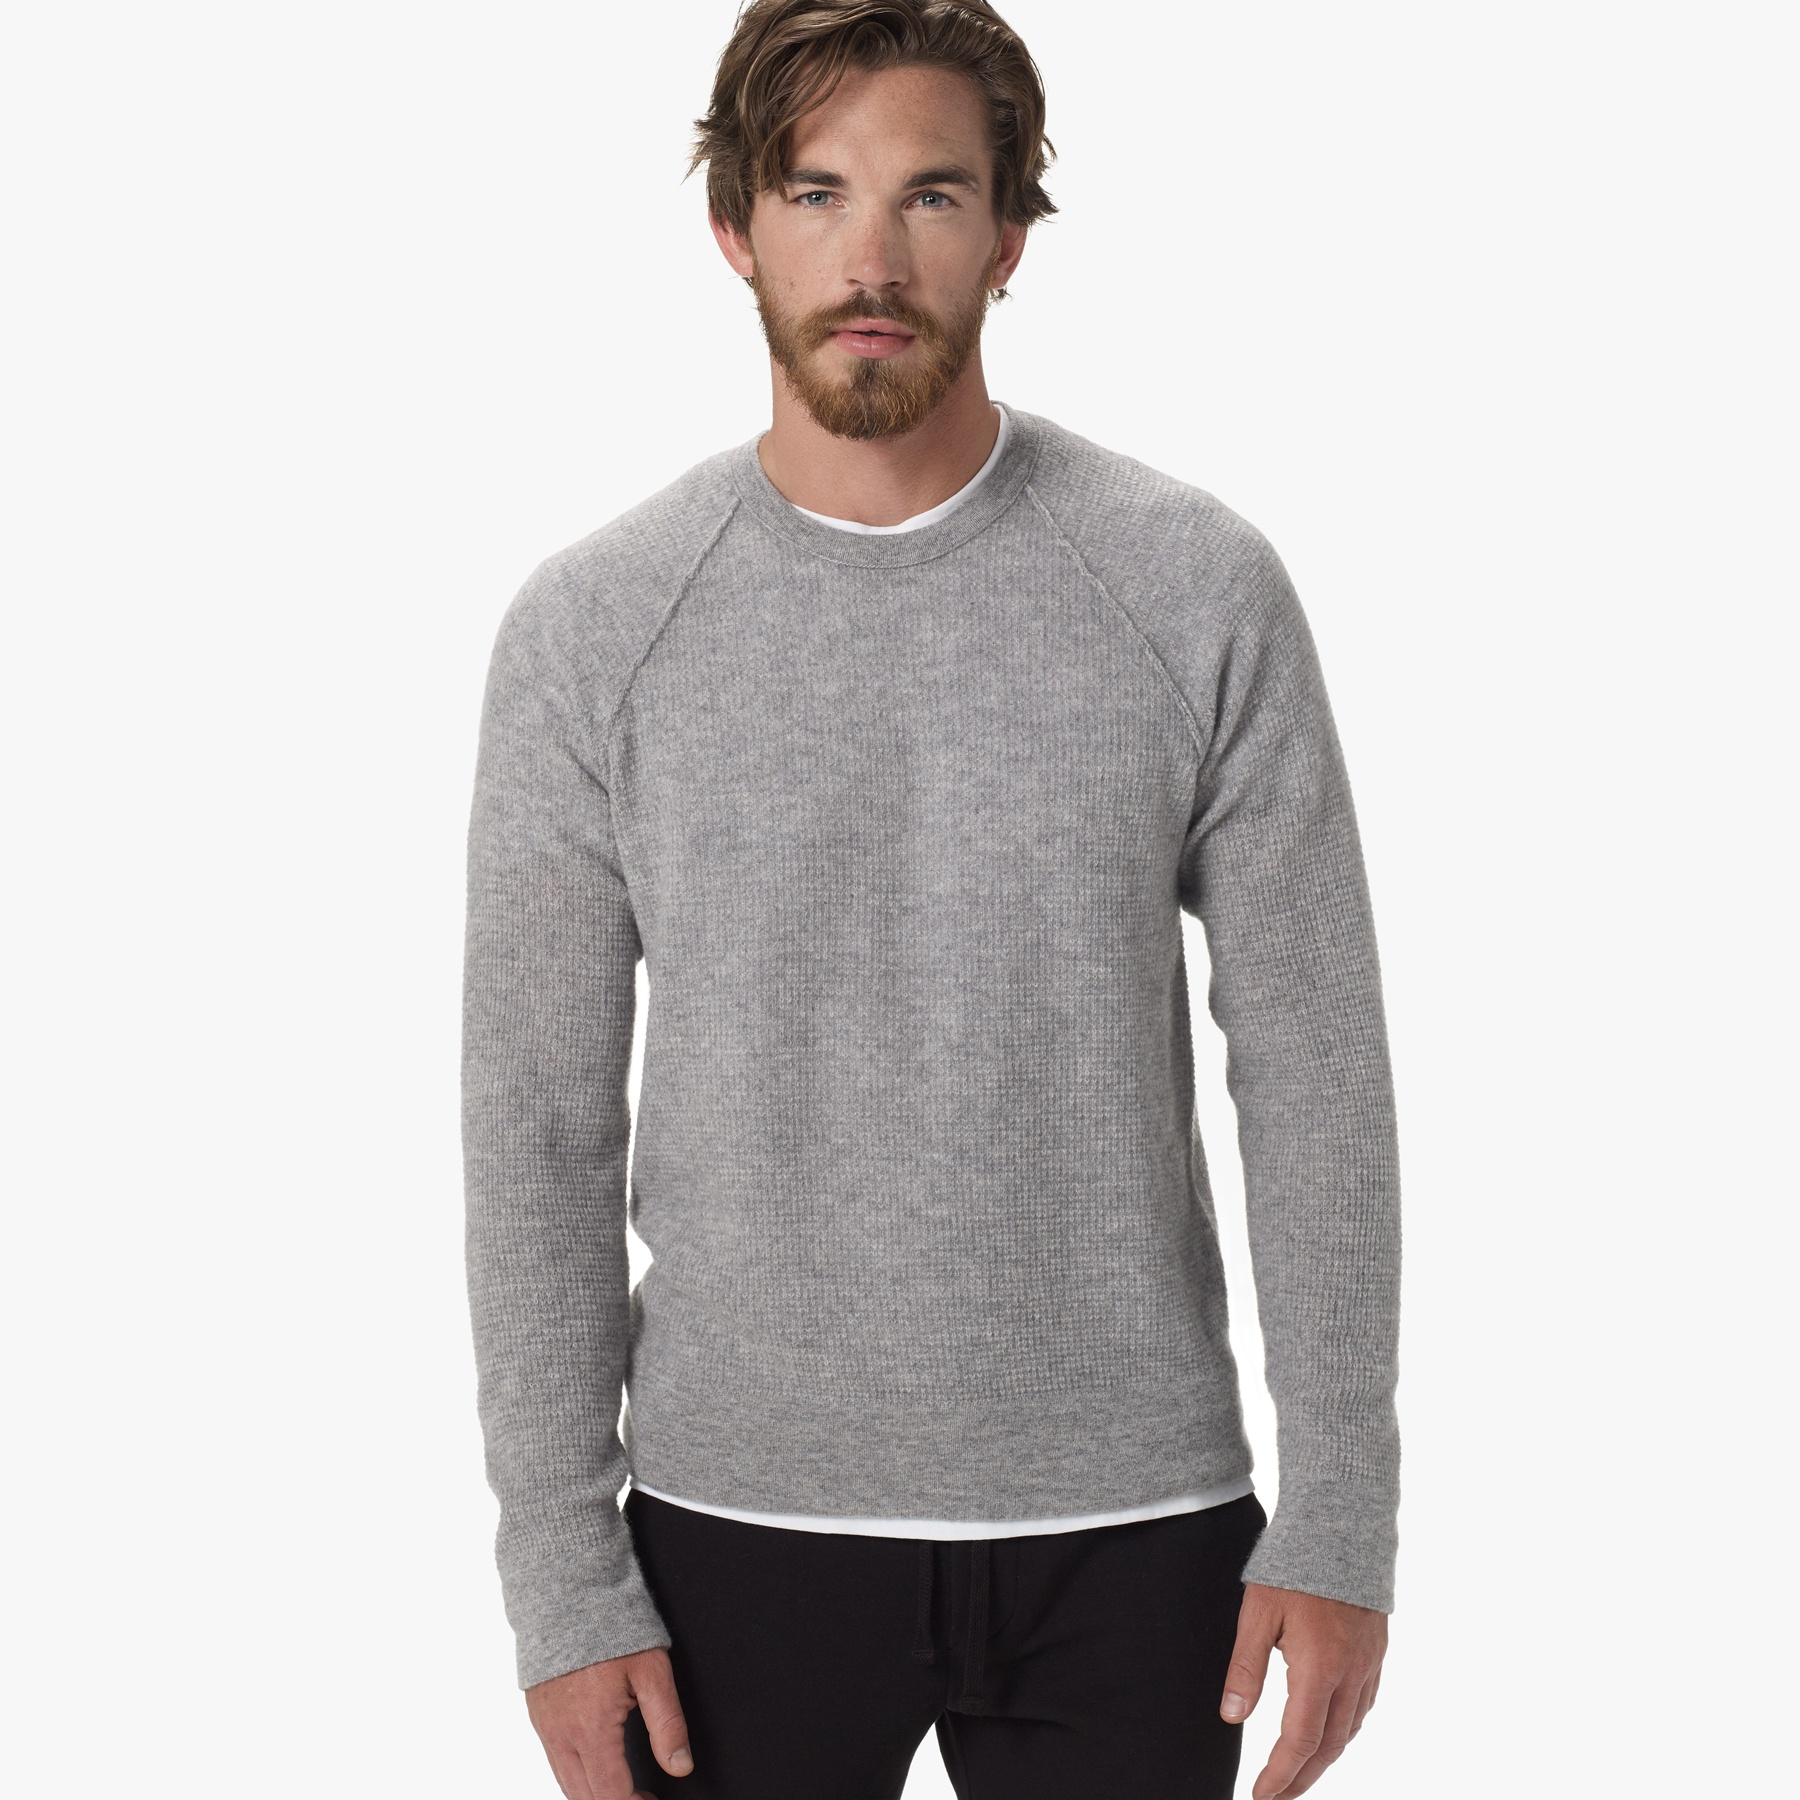 Lyst - James Perse Cashmere Thermal Raglan in Gray for Men